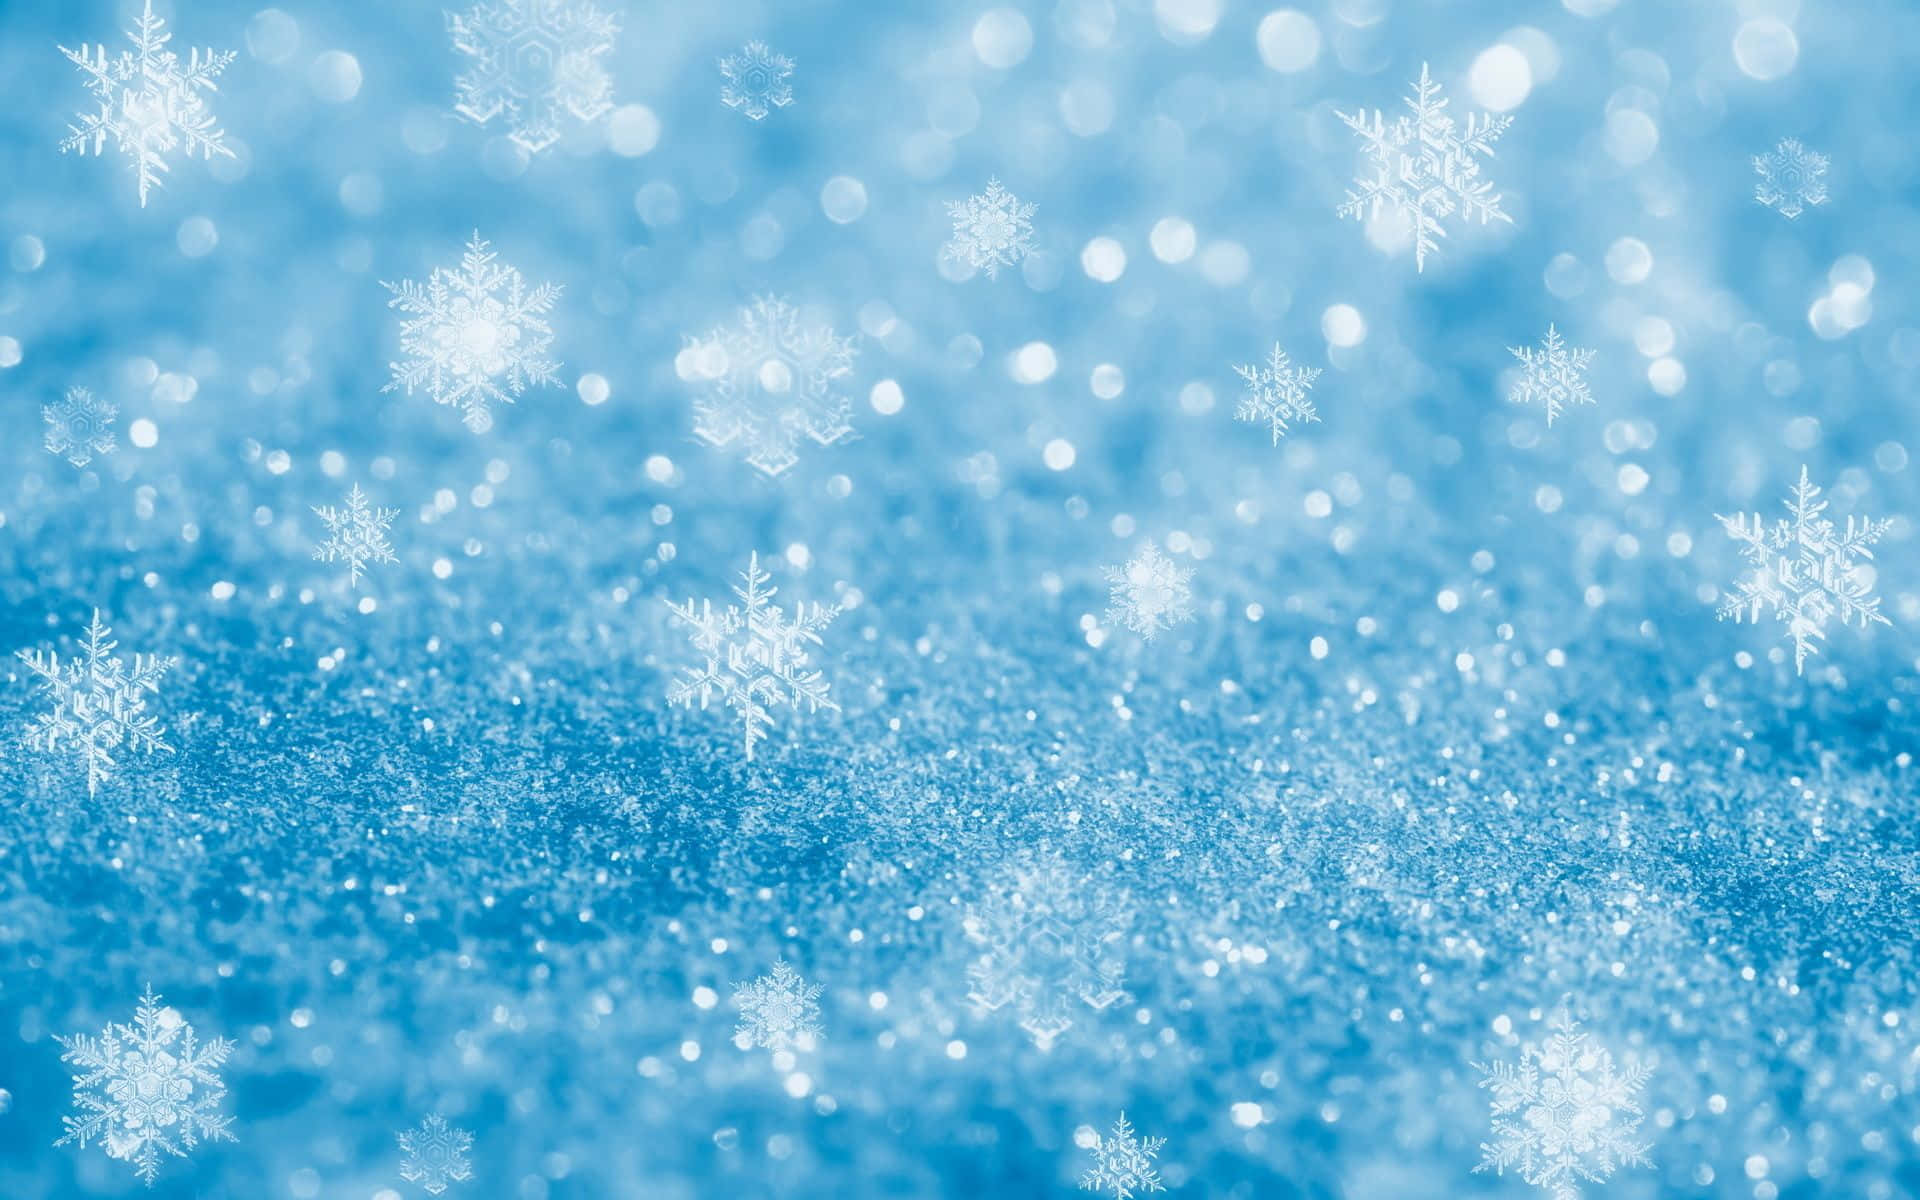 A beautiful blue glitter background, perfect for adding sparkle to any occasion.